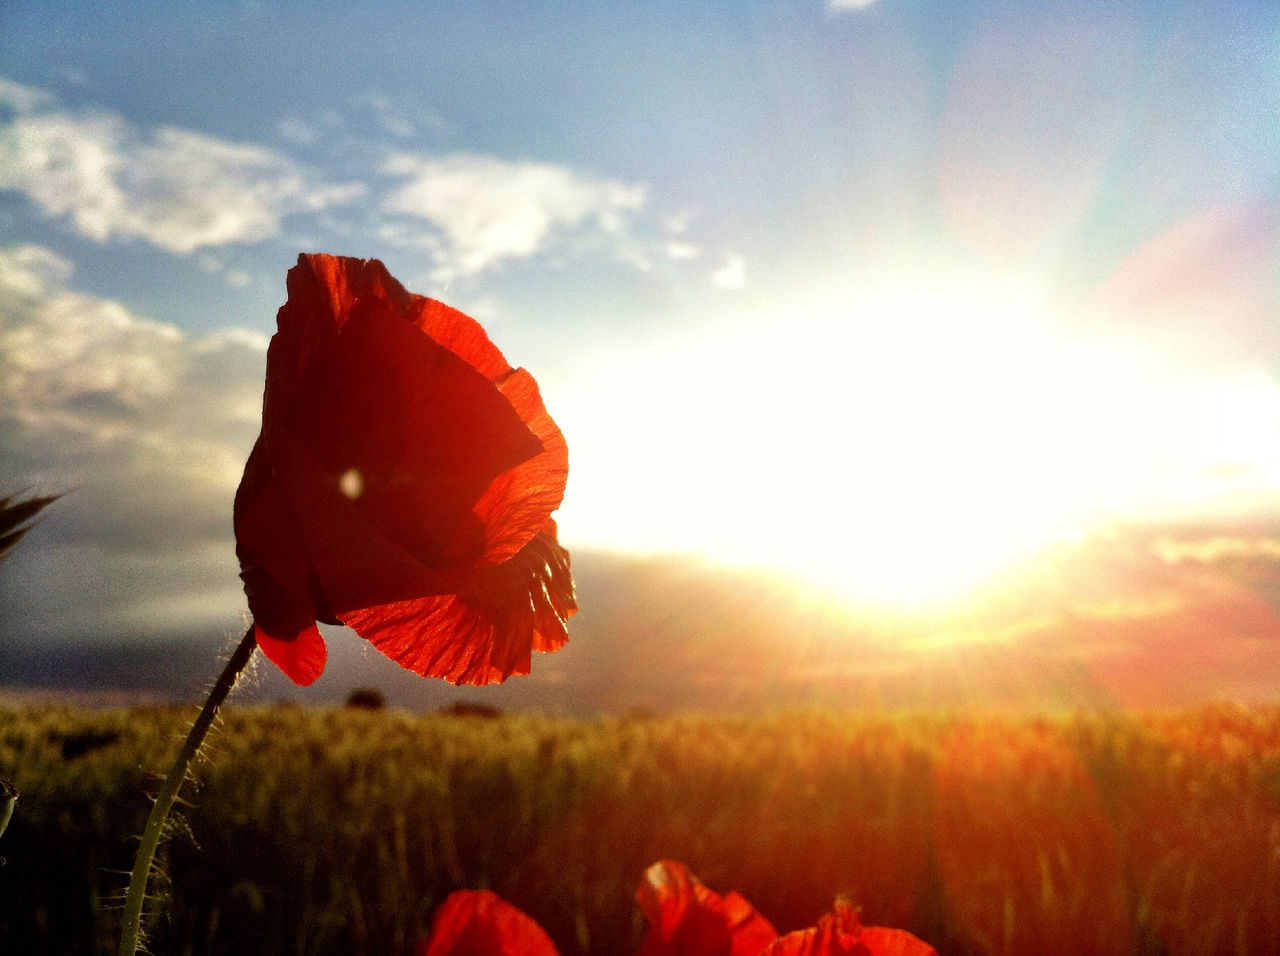 flower, red, beauty in nature, fragility, sky, petal, growth, freshness, nature, plant, sun, flower head, poppy, sunlight, field, focus on foreground, sunset, tranquility, close-up, cloud - sky